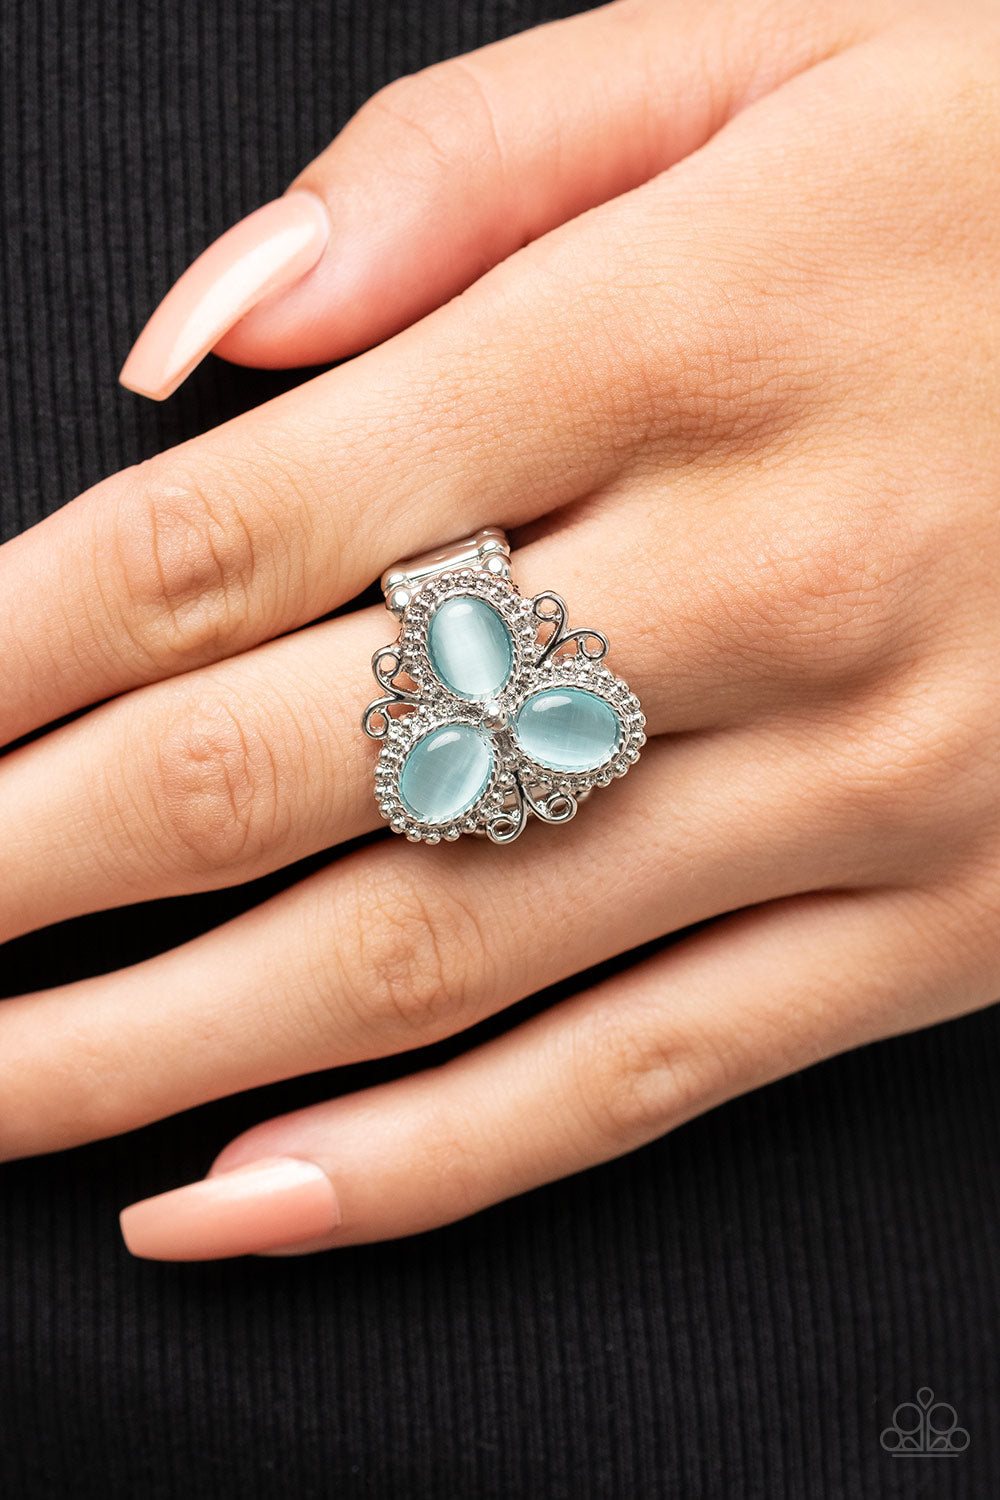 Bewitched Blossoms - Blue Cat's Eye Stone & Silver Filigree Paparazzi Ring